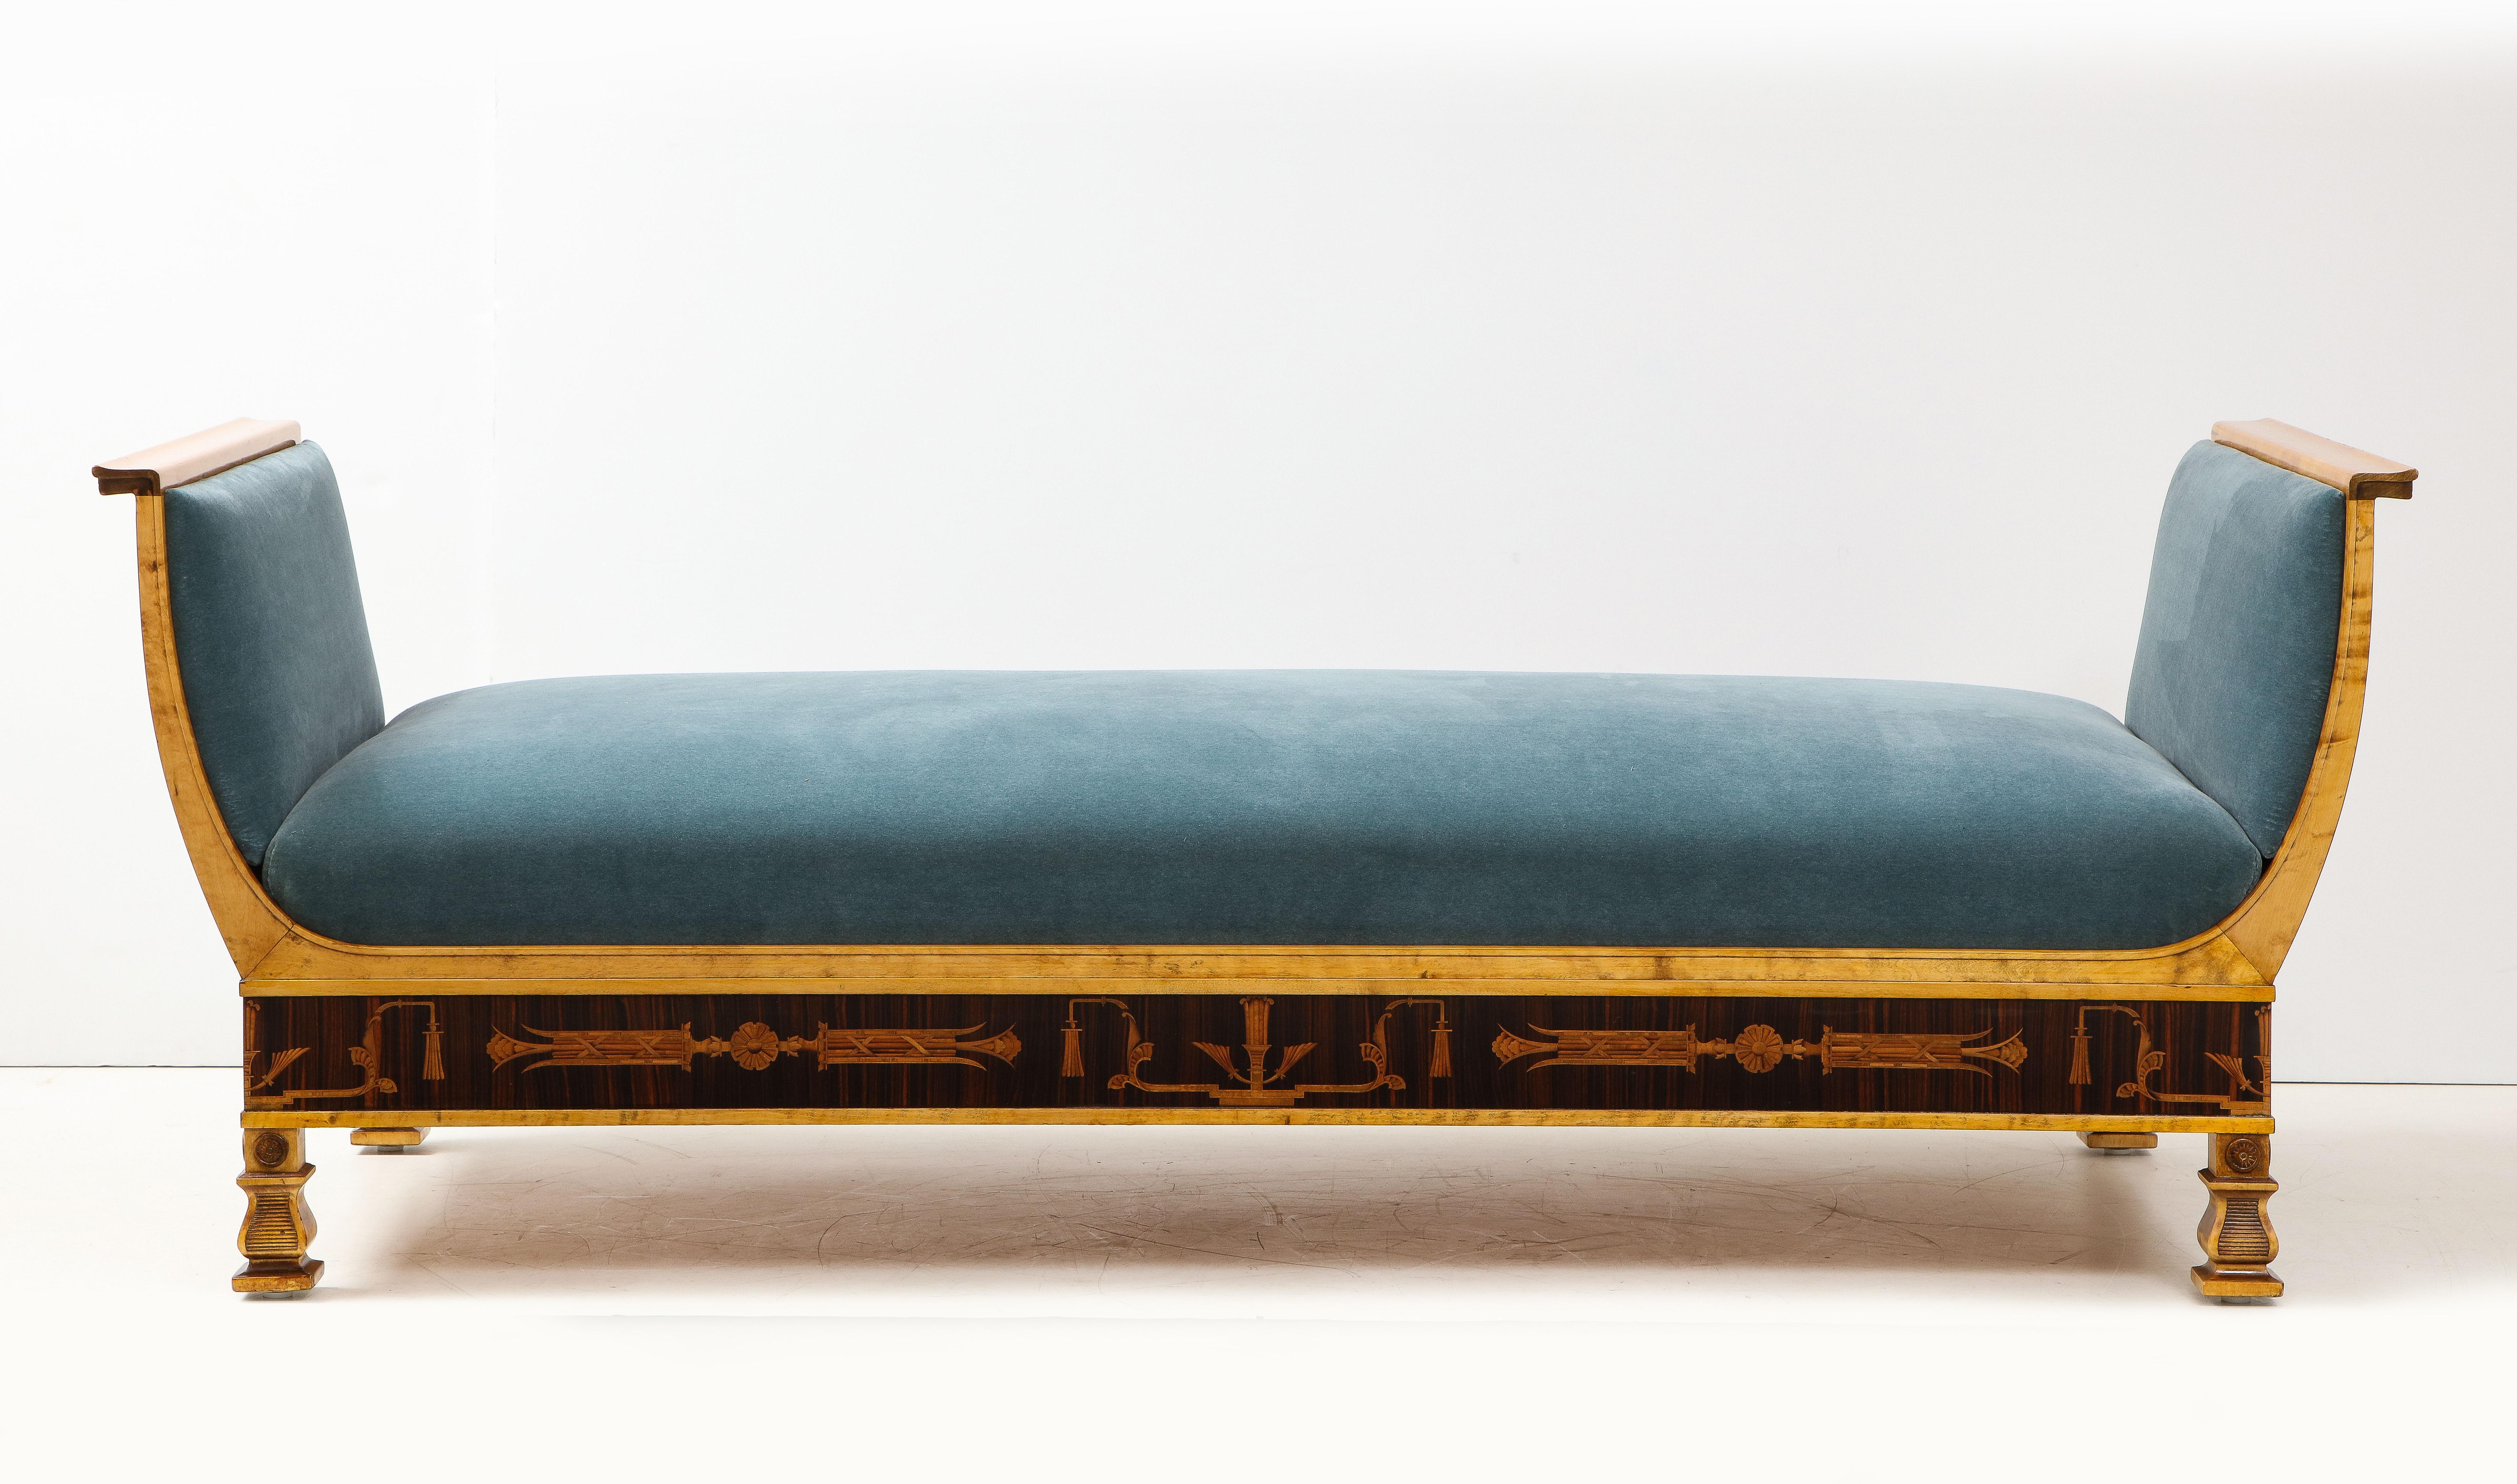 A Swedish Grace birchwood and jacaranda inlaid daybed, Circa 1920-1930, designed by Carl Malmsten and produced by Svenska Möbelfabrikerna Bodafors, with new velvet upholstery between out curved sides, an inlaid stylized classical frieze raised on